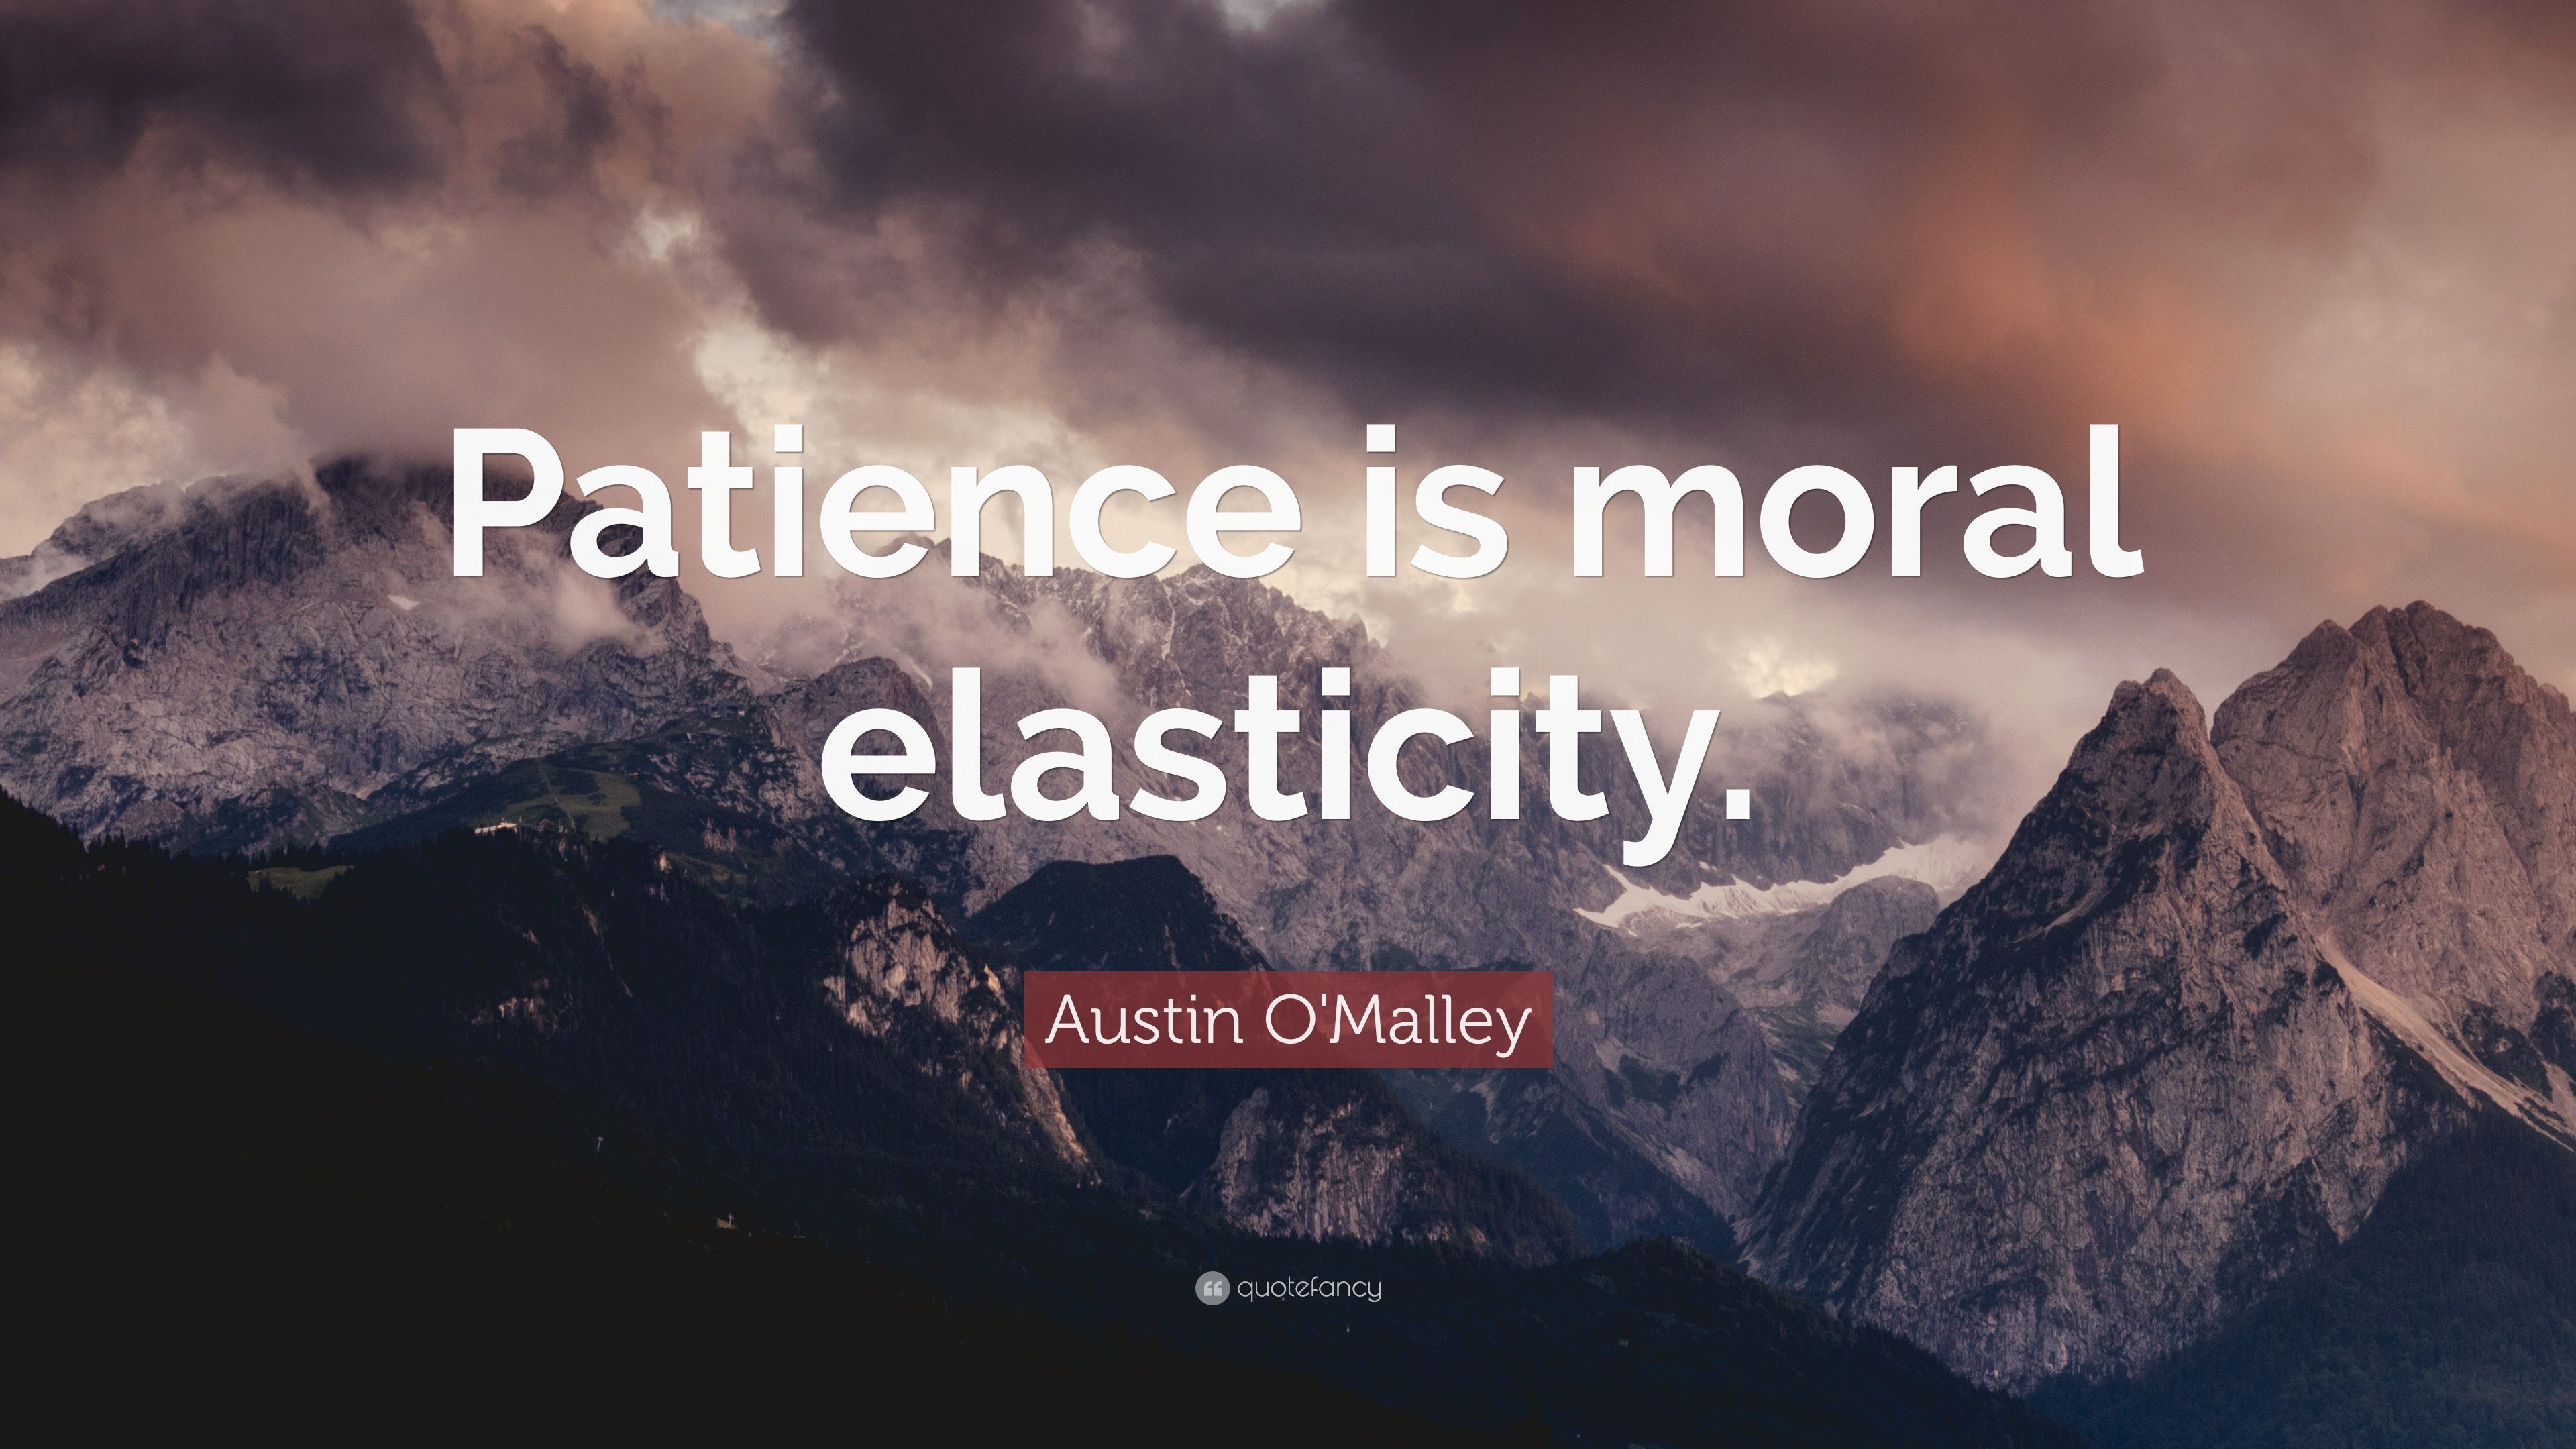 Austin O'Malley Quote: "Patience is moral elasticity. 